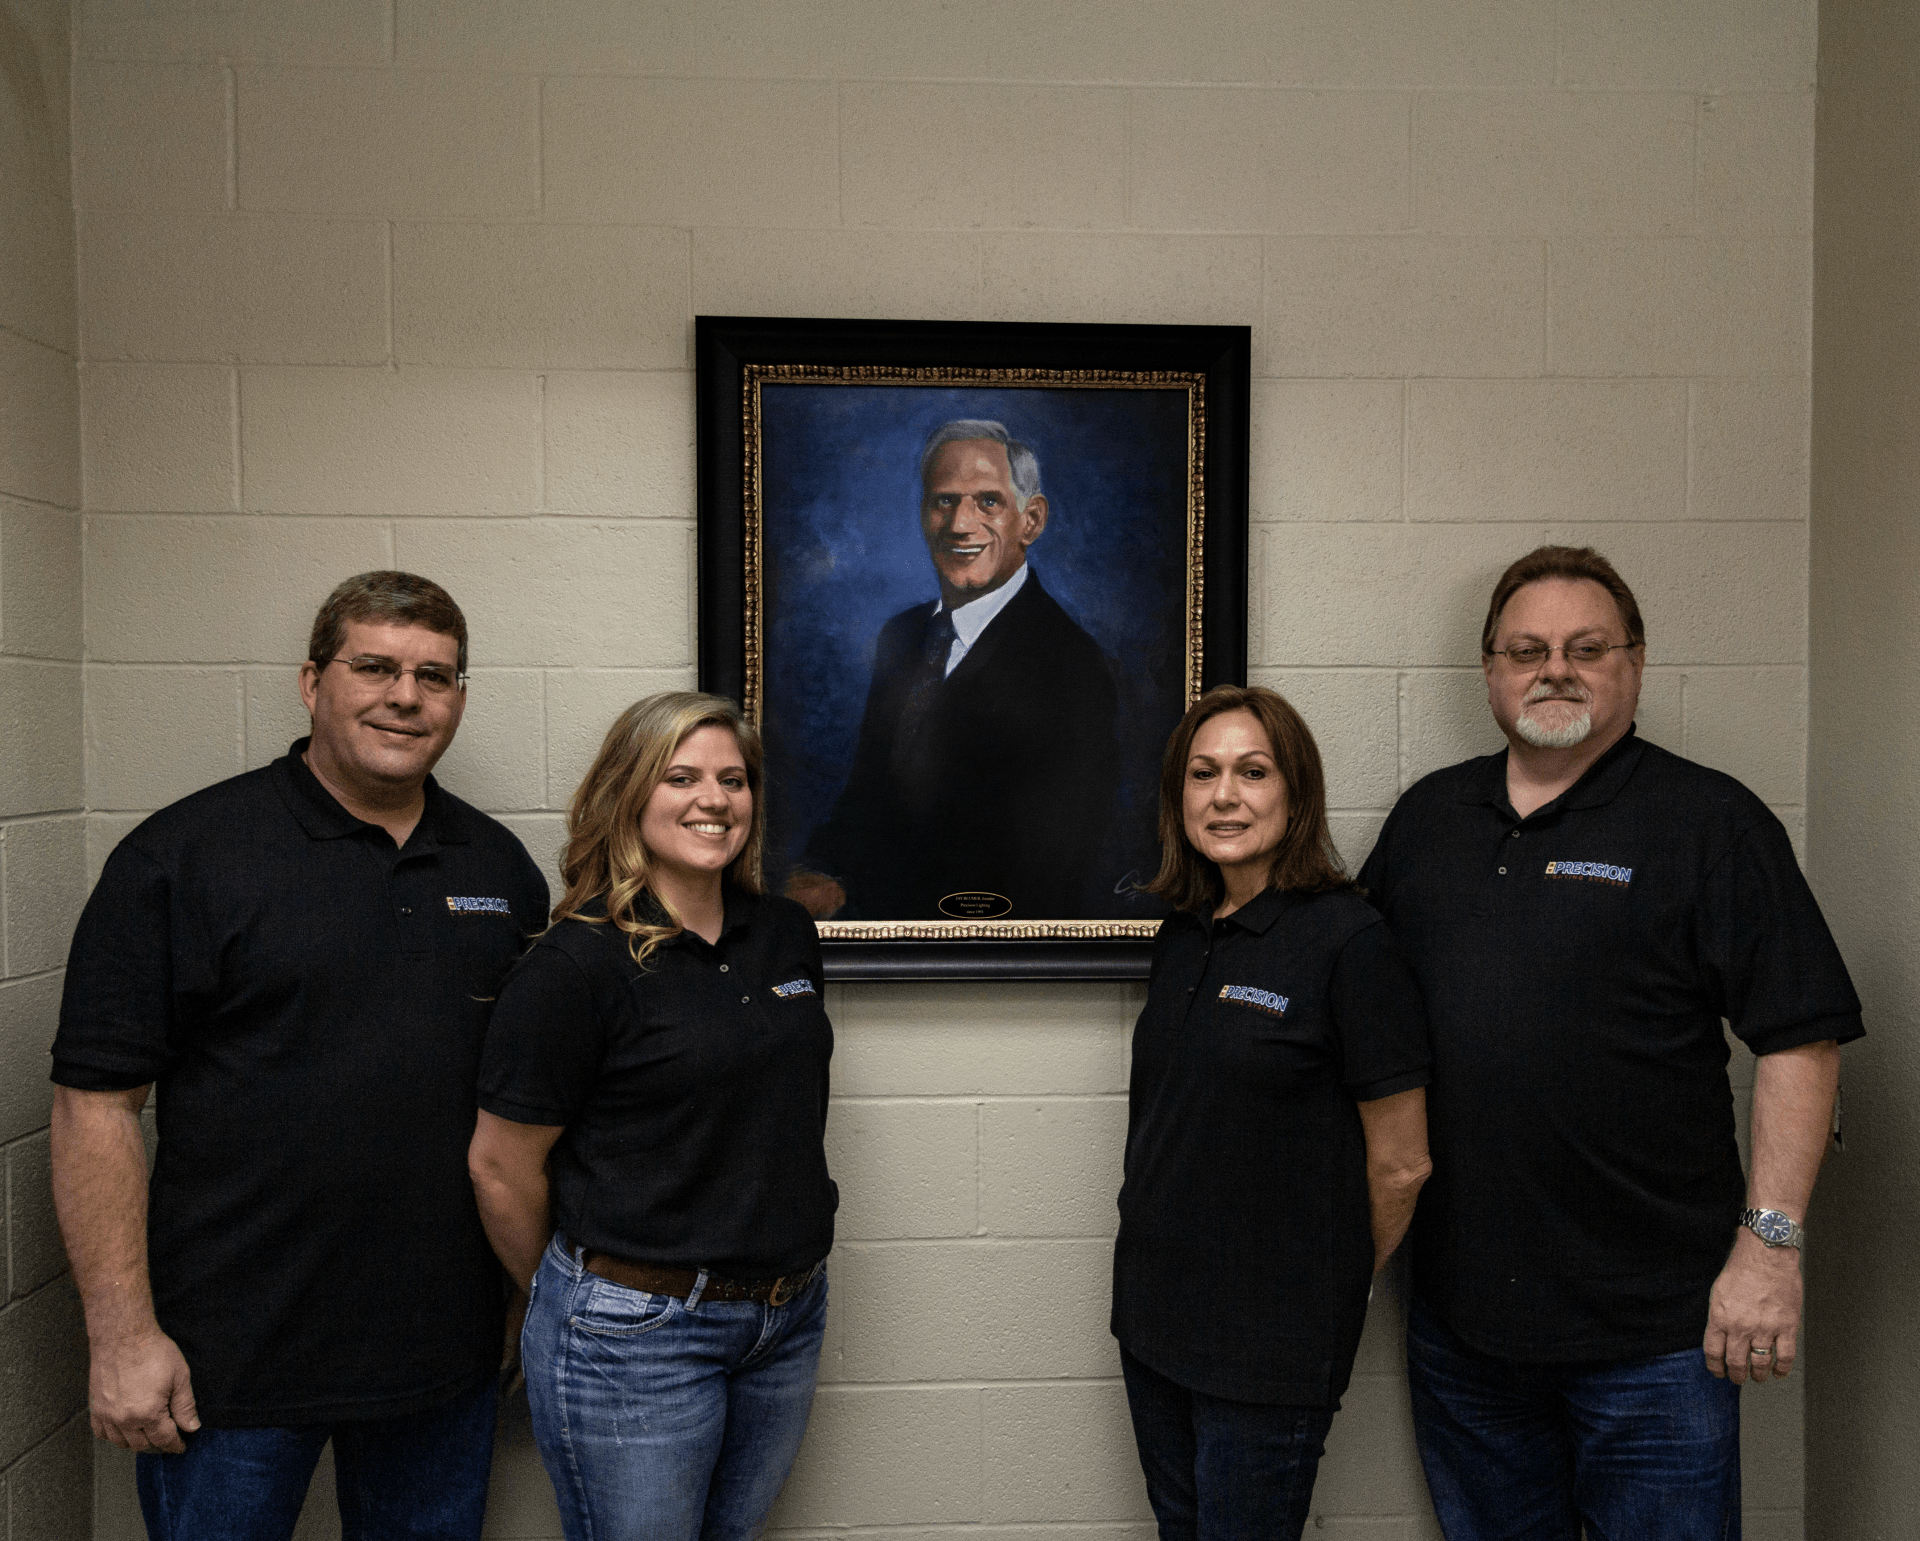 current board of directors standing in front of portrait of jay blumer at Precision Lighting Systems in Hot Springs, AR